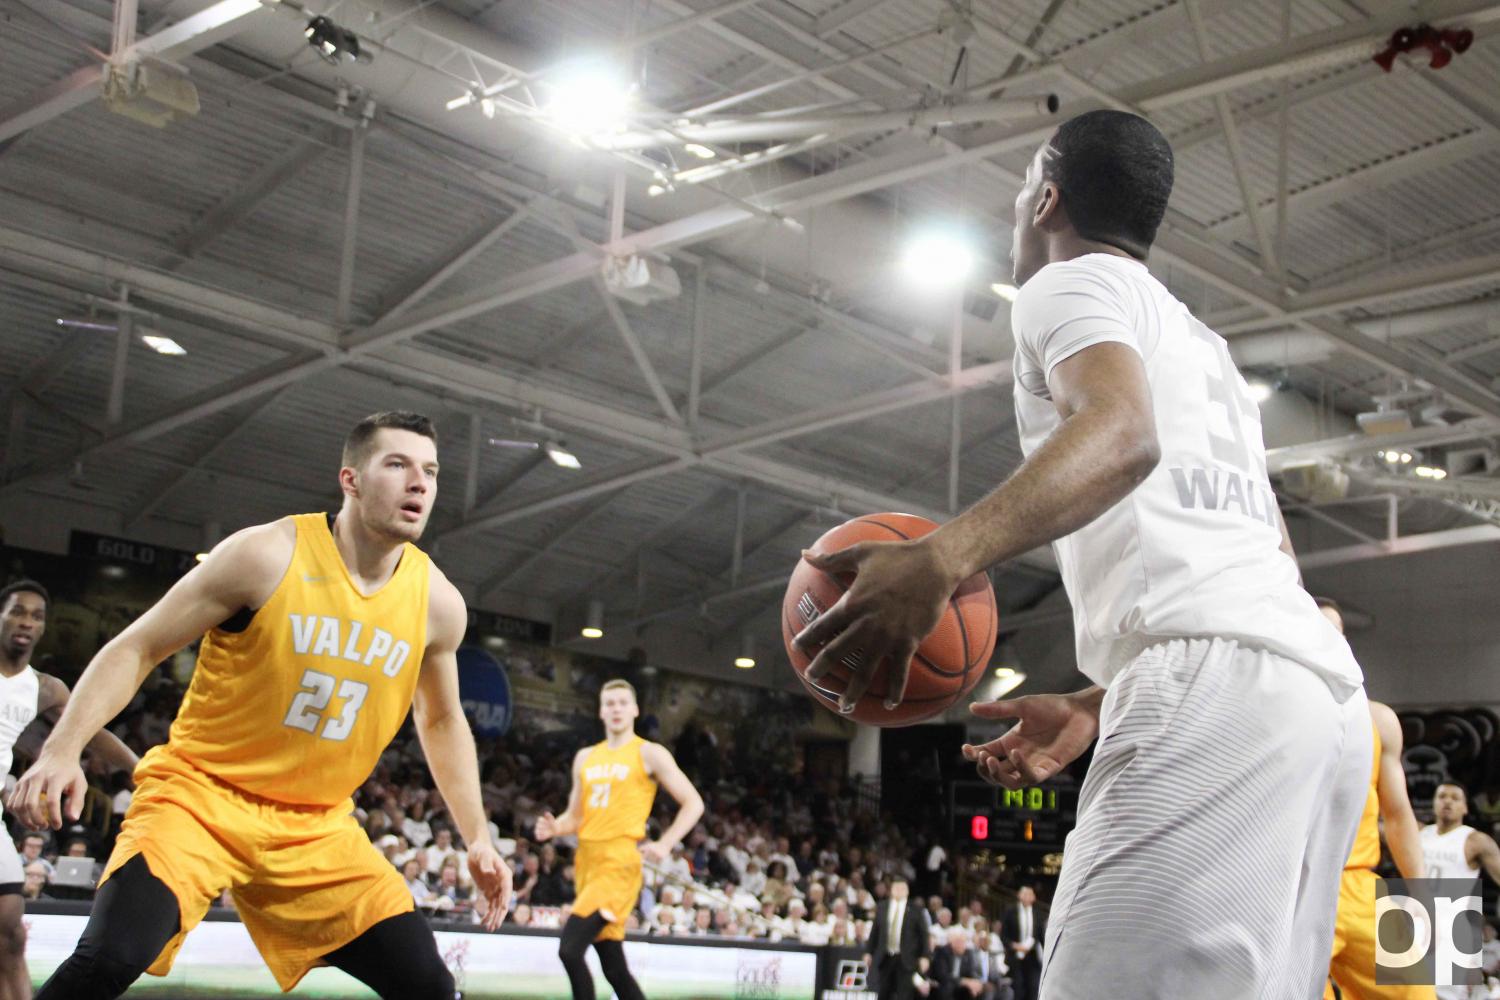 Oakland faced off against Valpo for the last time on February 17th of this year.